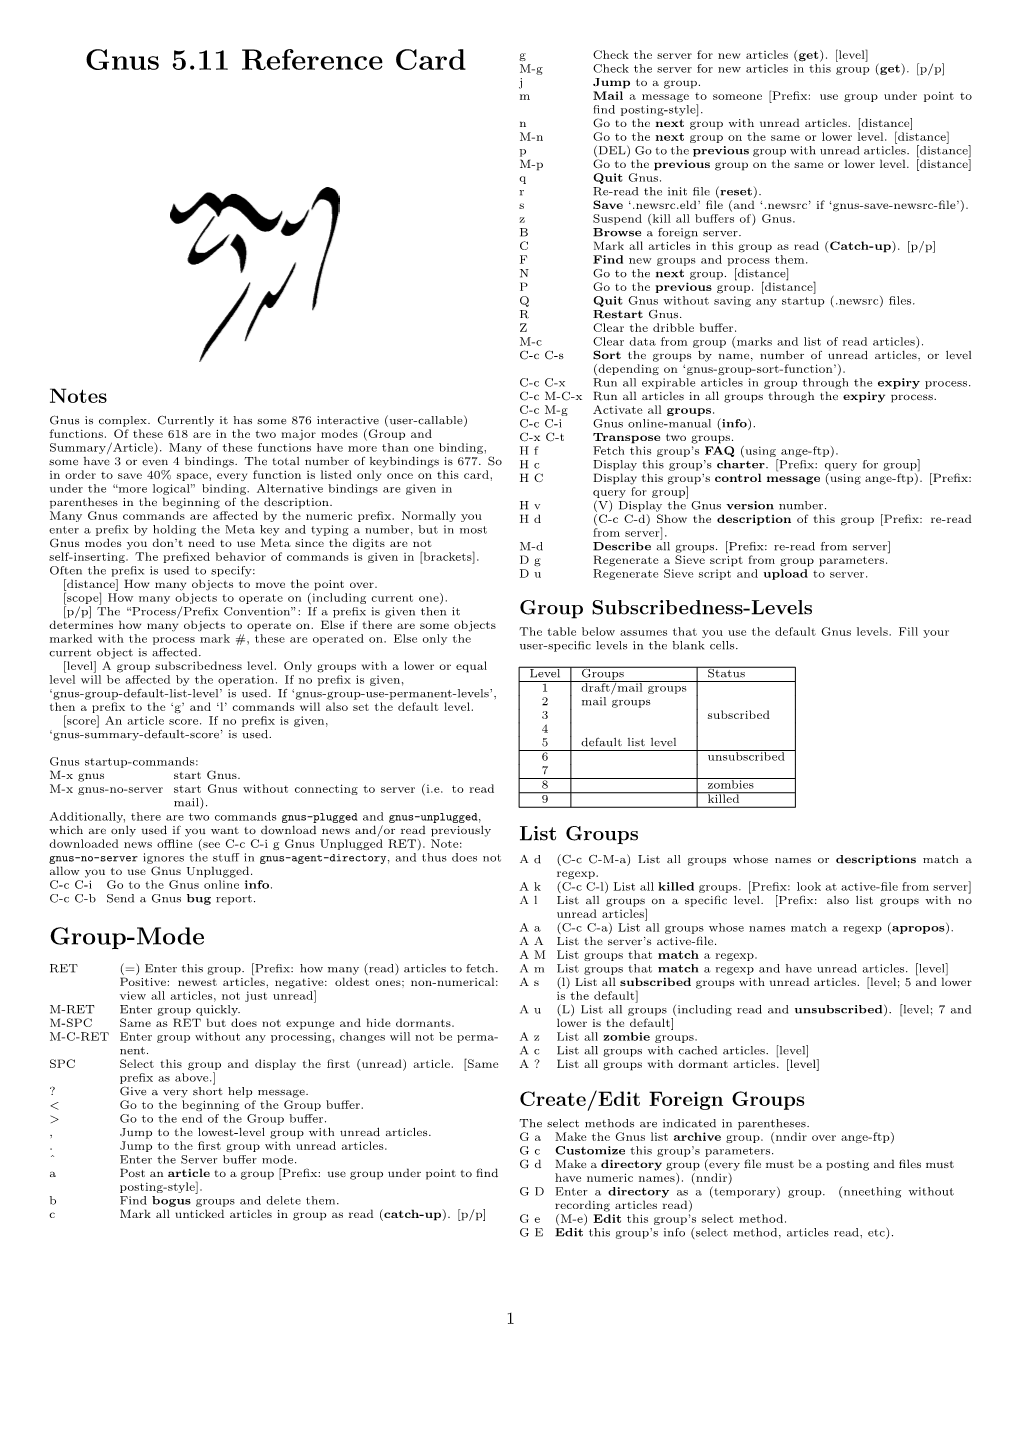 Gnus 5.11 Reference Card M-G Check the Server for New Articles in This Group (Get)